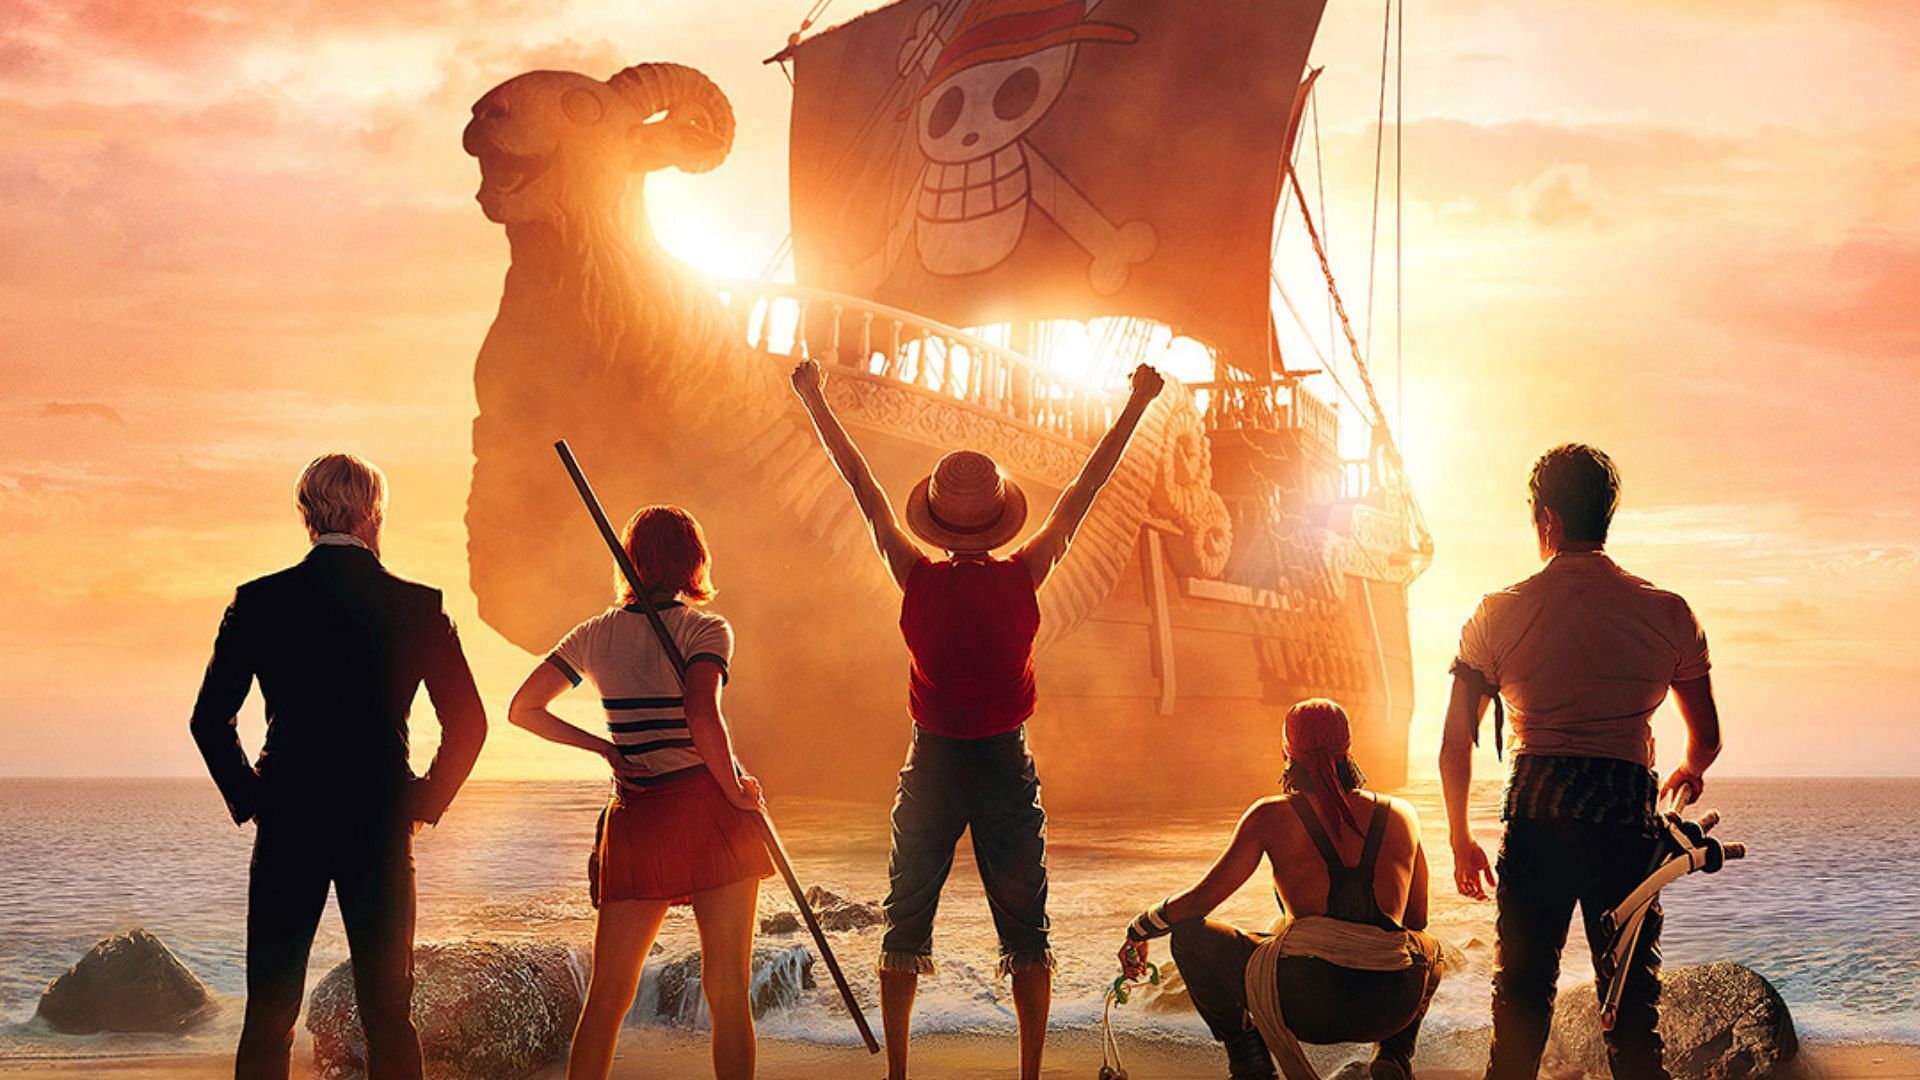 ONE PIECE Character Posters Introduce Netflix's Live-Action Take